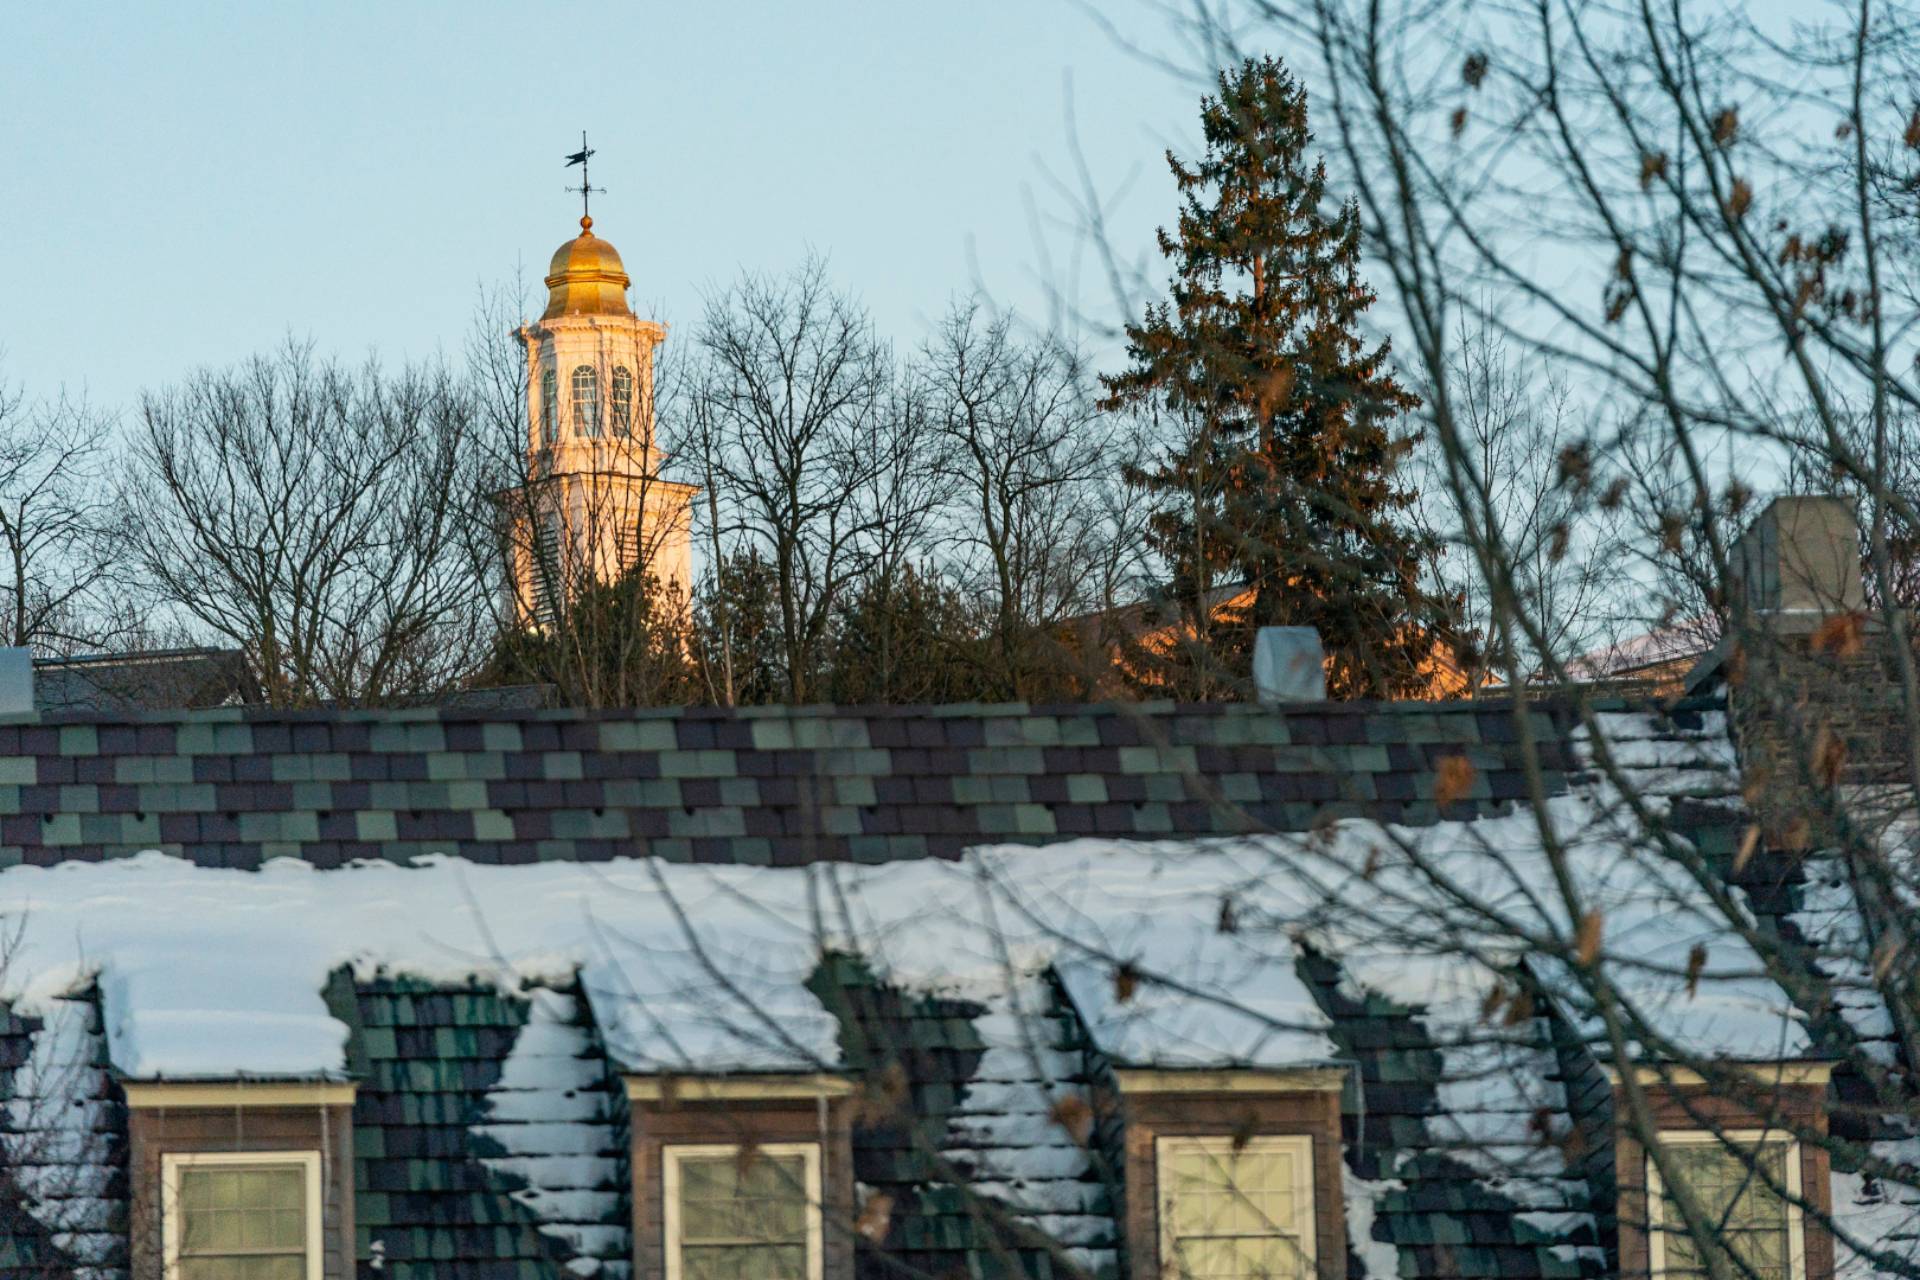 Sunset on the roof of James C. Colgate, with Memorial Chapel in the background